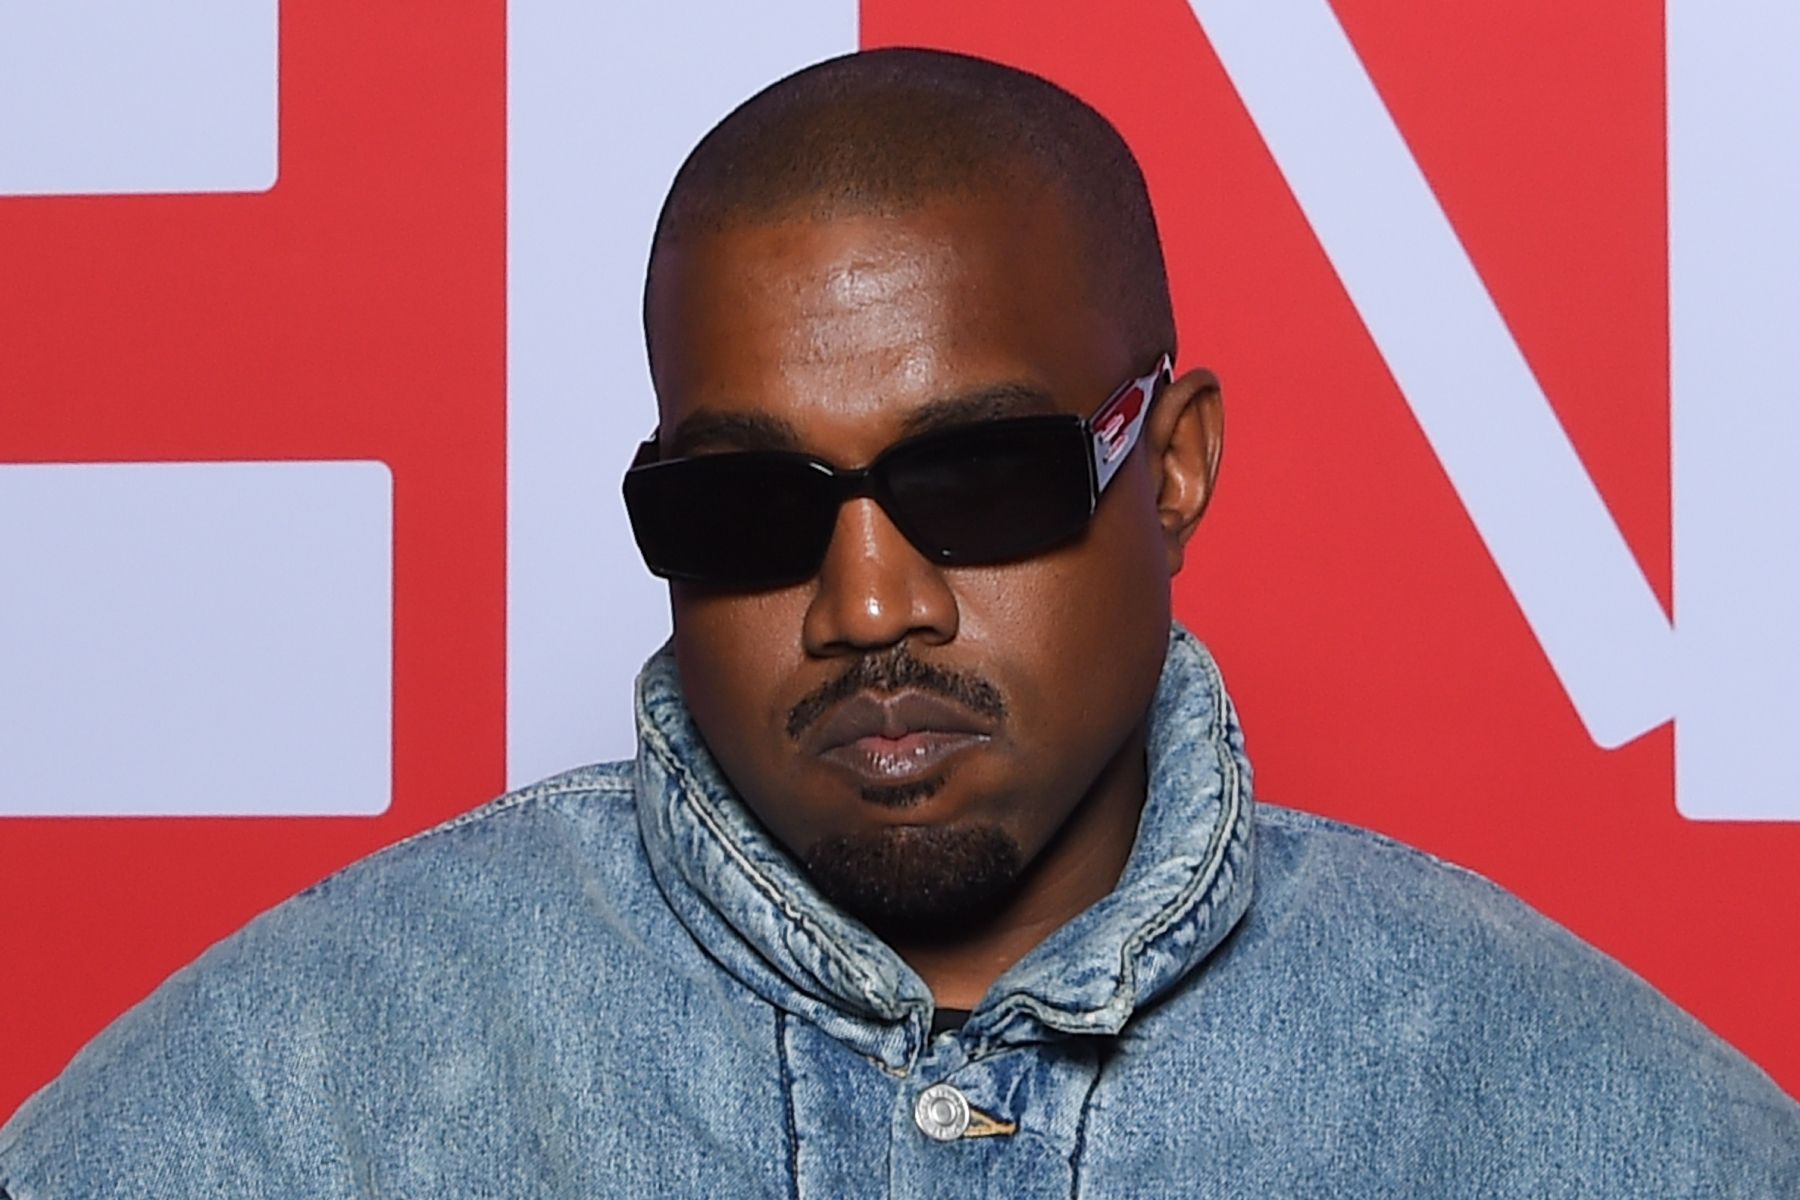 KANYE WEST OTHER KNOWN AS “YE” FOUND DEAD IN ATLANTA